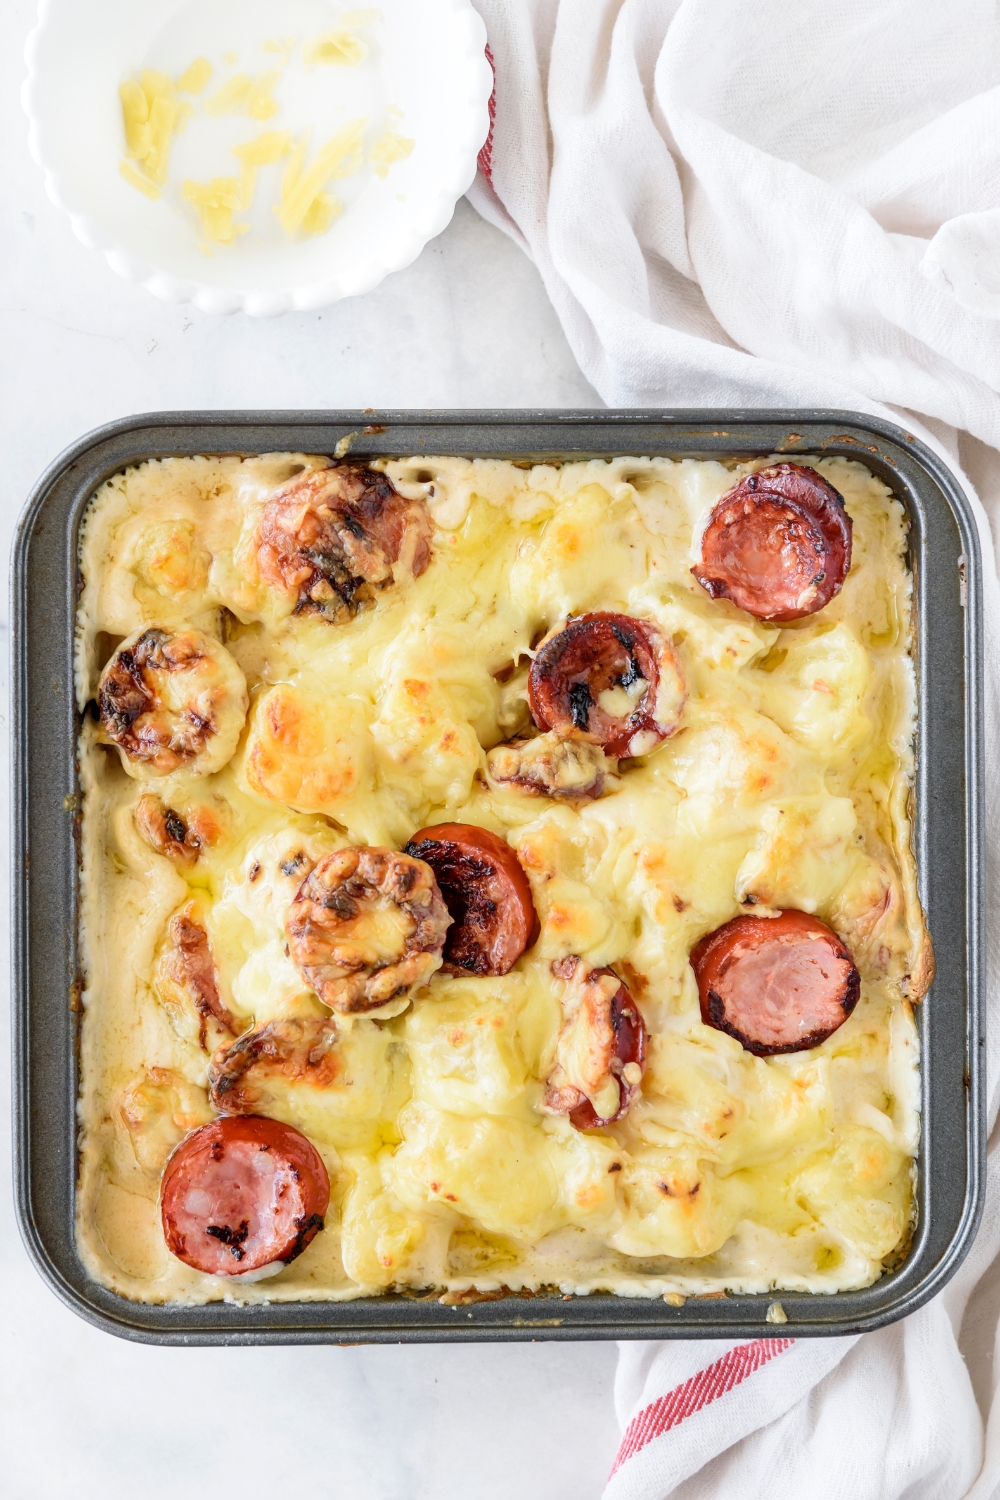 A baking dish filled with freshly baked sausage casserole. The casserole is golden brown and the sausages are browned and crispy.